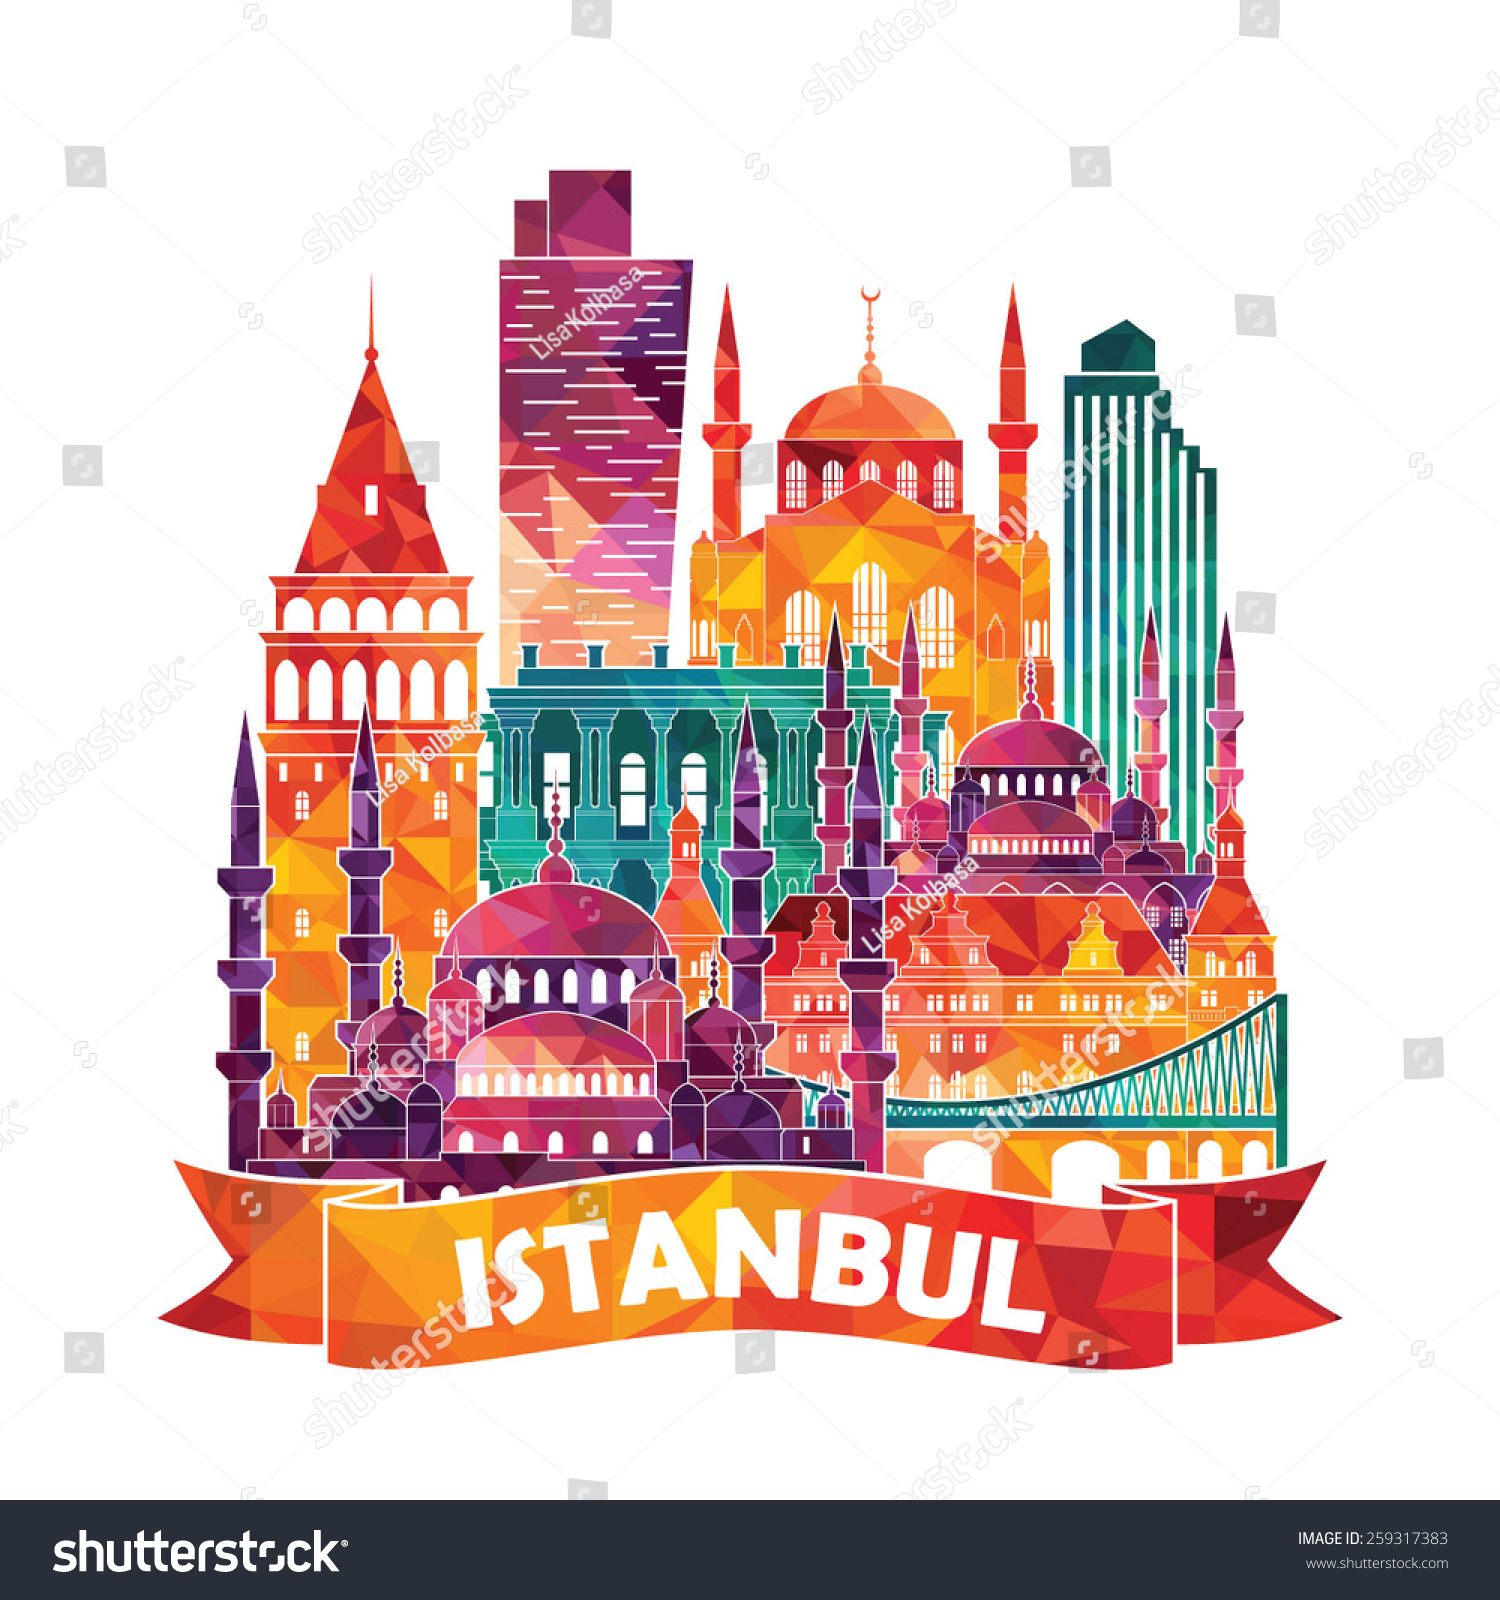 clipart istanbul - photo #21